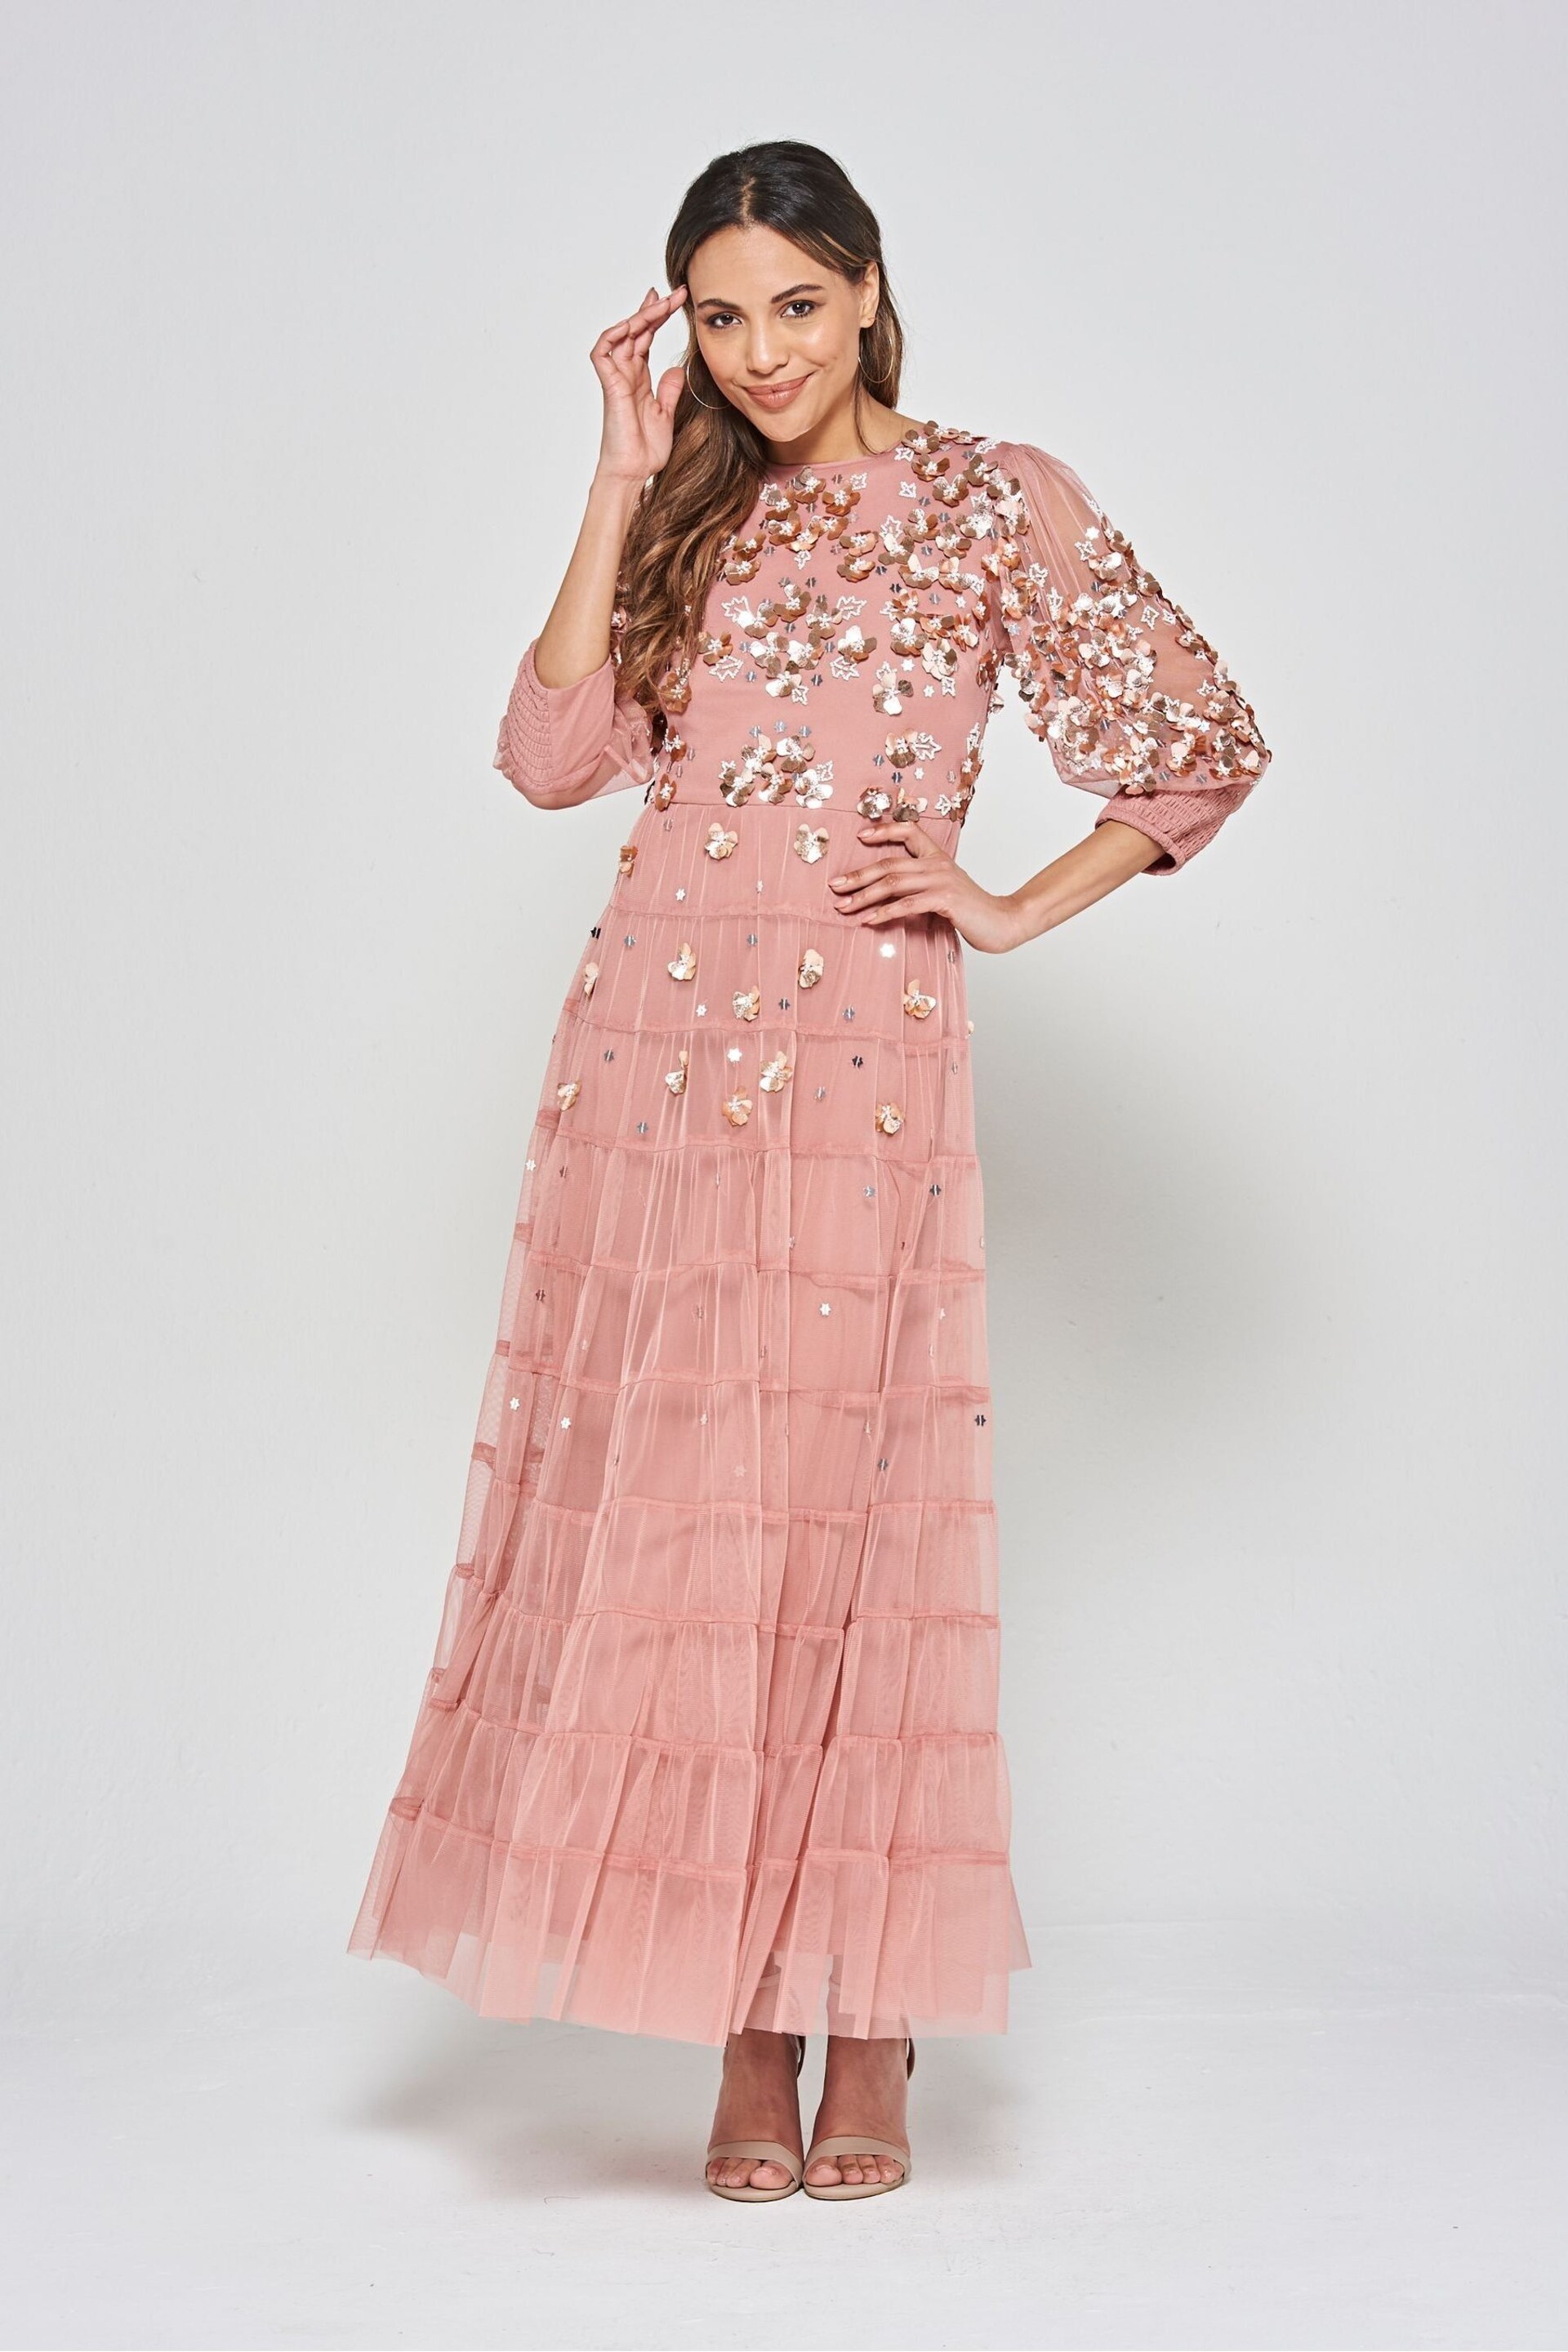 Frock and Frill Pink Embellished Maxi Dress - Image 3 of 4